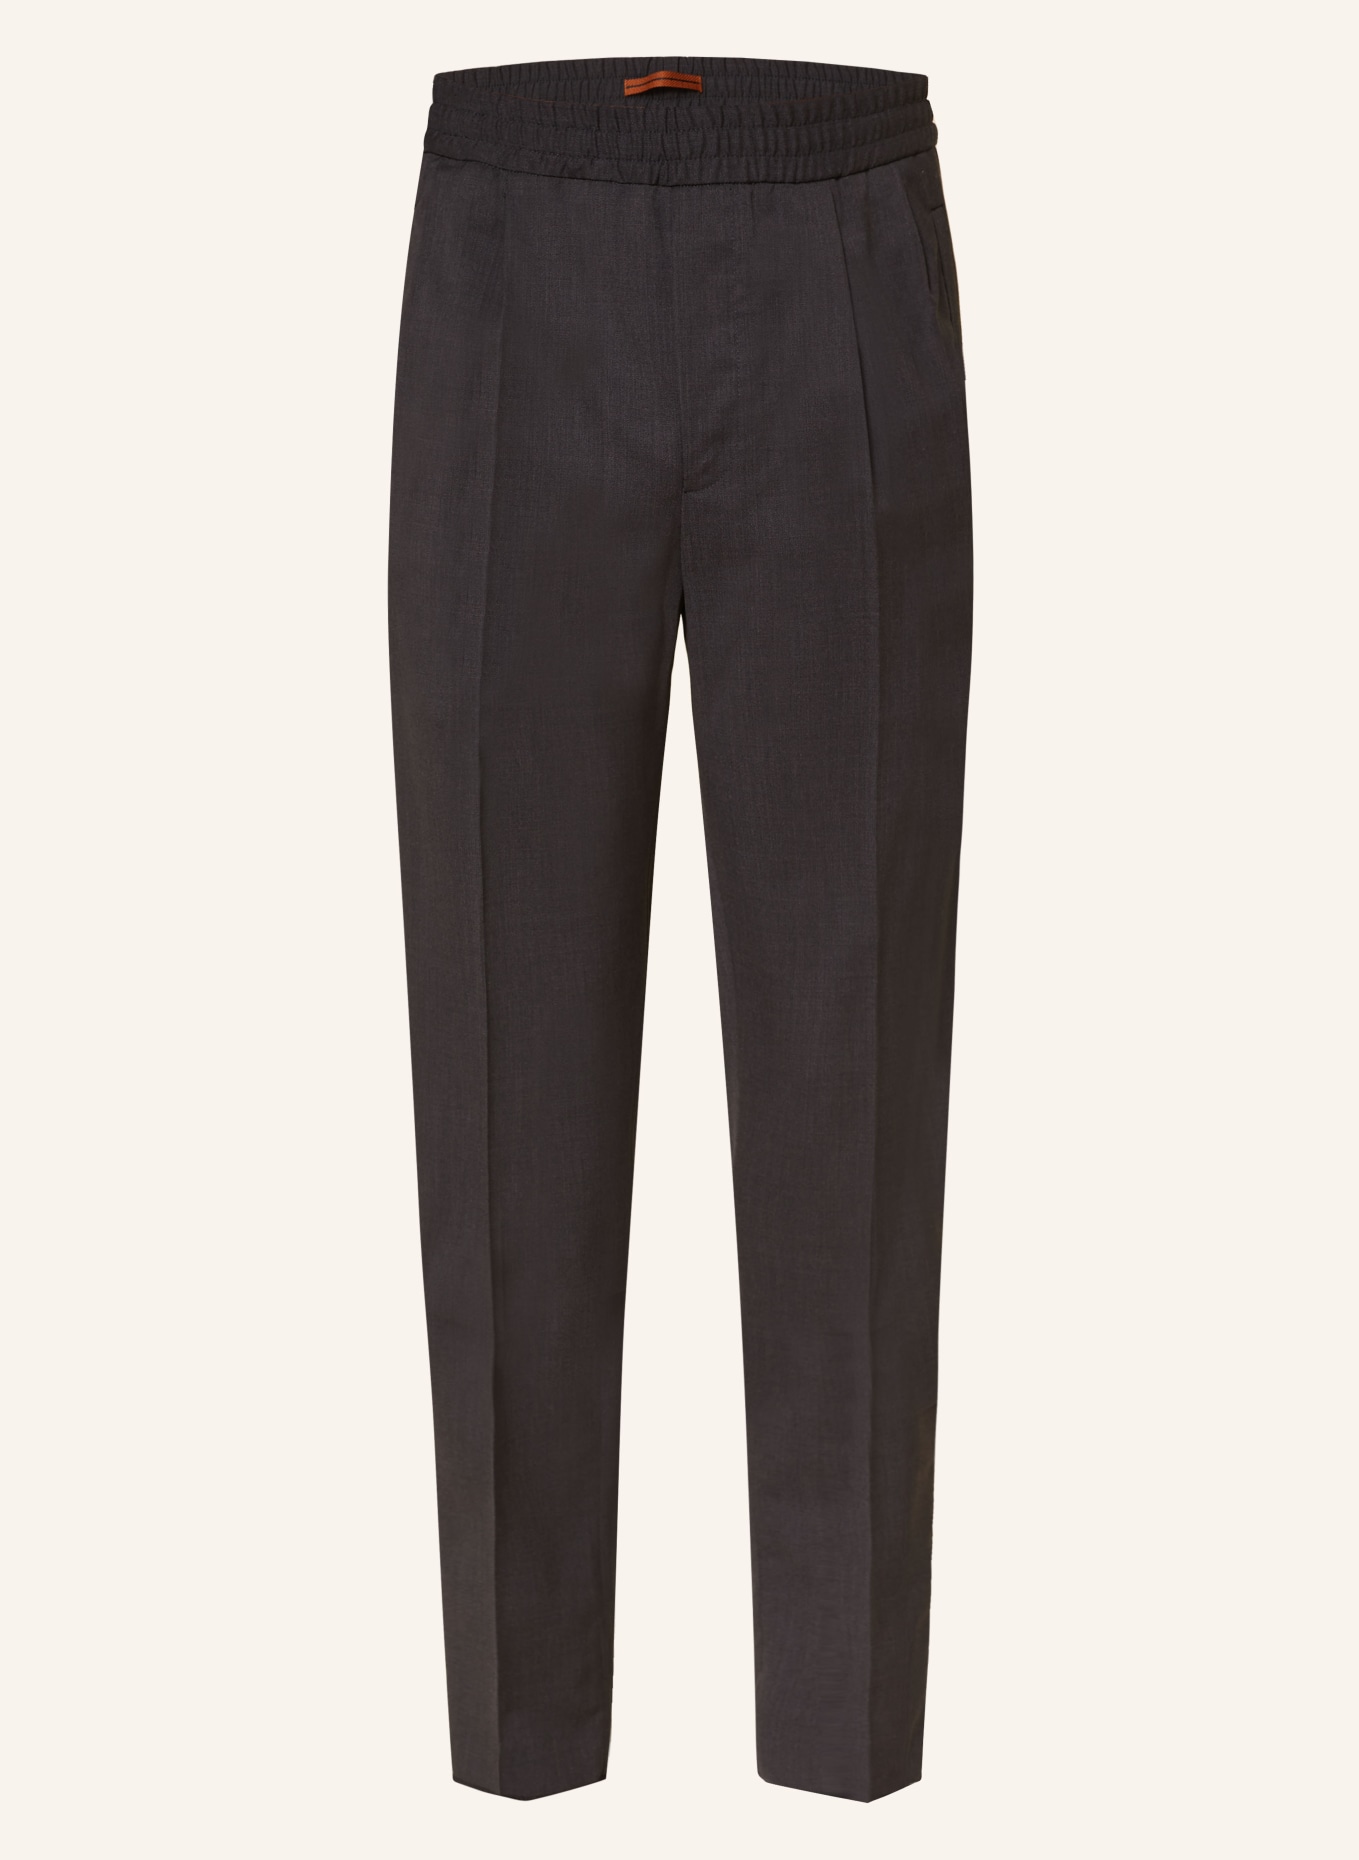 ZEGNA Pants in jogger style extra slim fit, Color: 3A7 Anthra (Image 1)